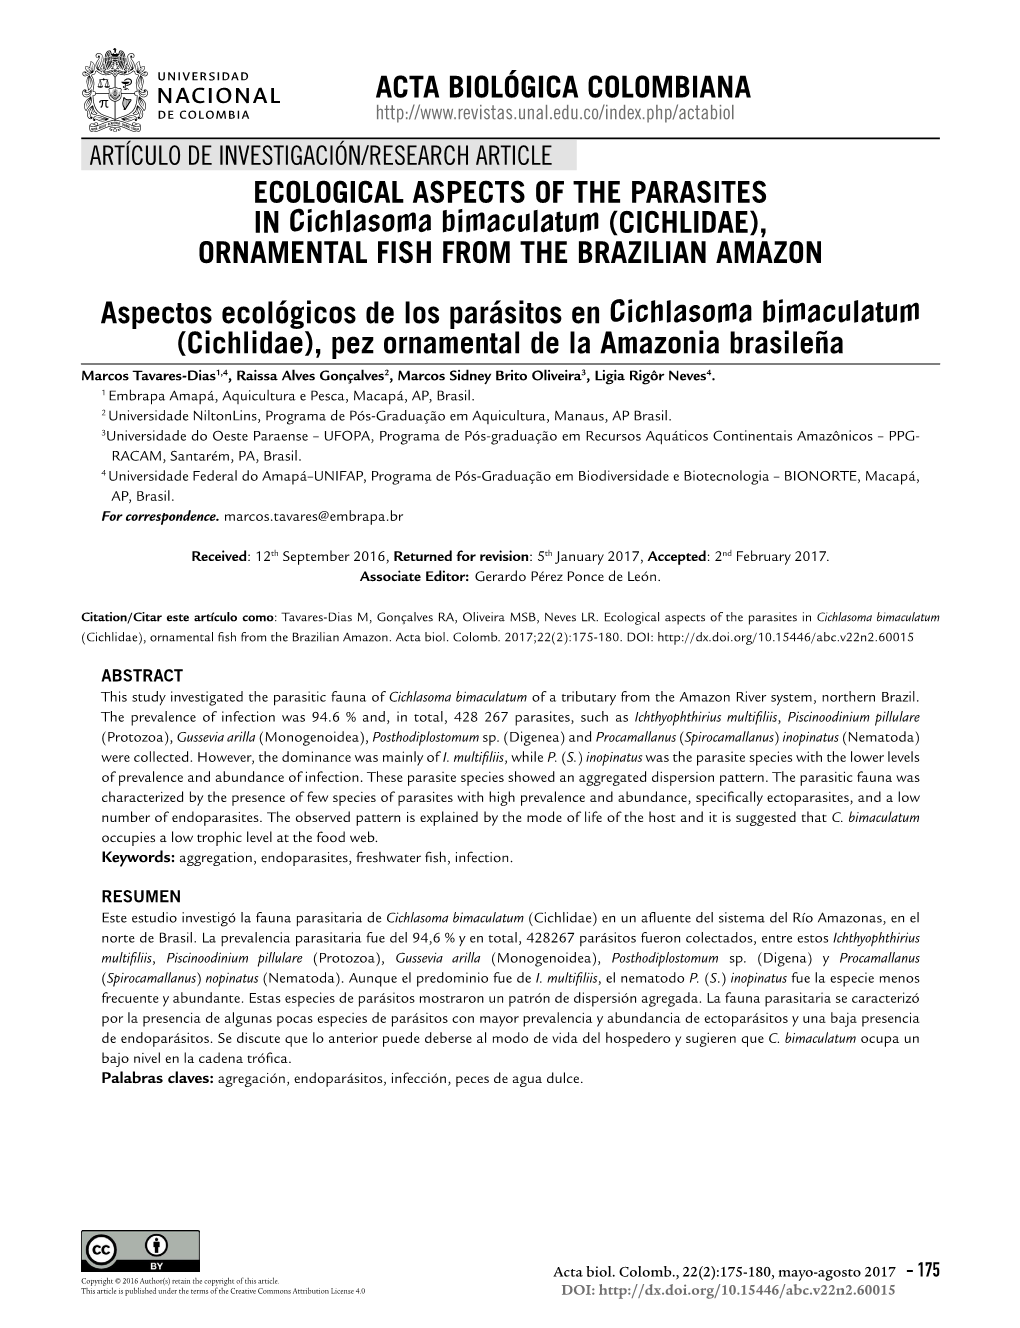 ECOLOGICAL ASPECTS of the PARASITES in Cichlasoma Bimaculatum (CICHLIDAE), ORNAMENTAL FISH from the BRAZILIAN AMAZON Aspectos